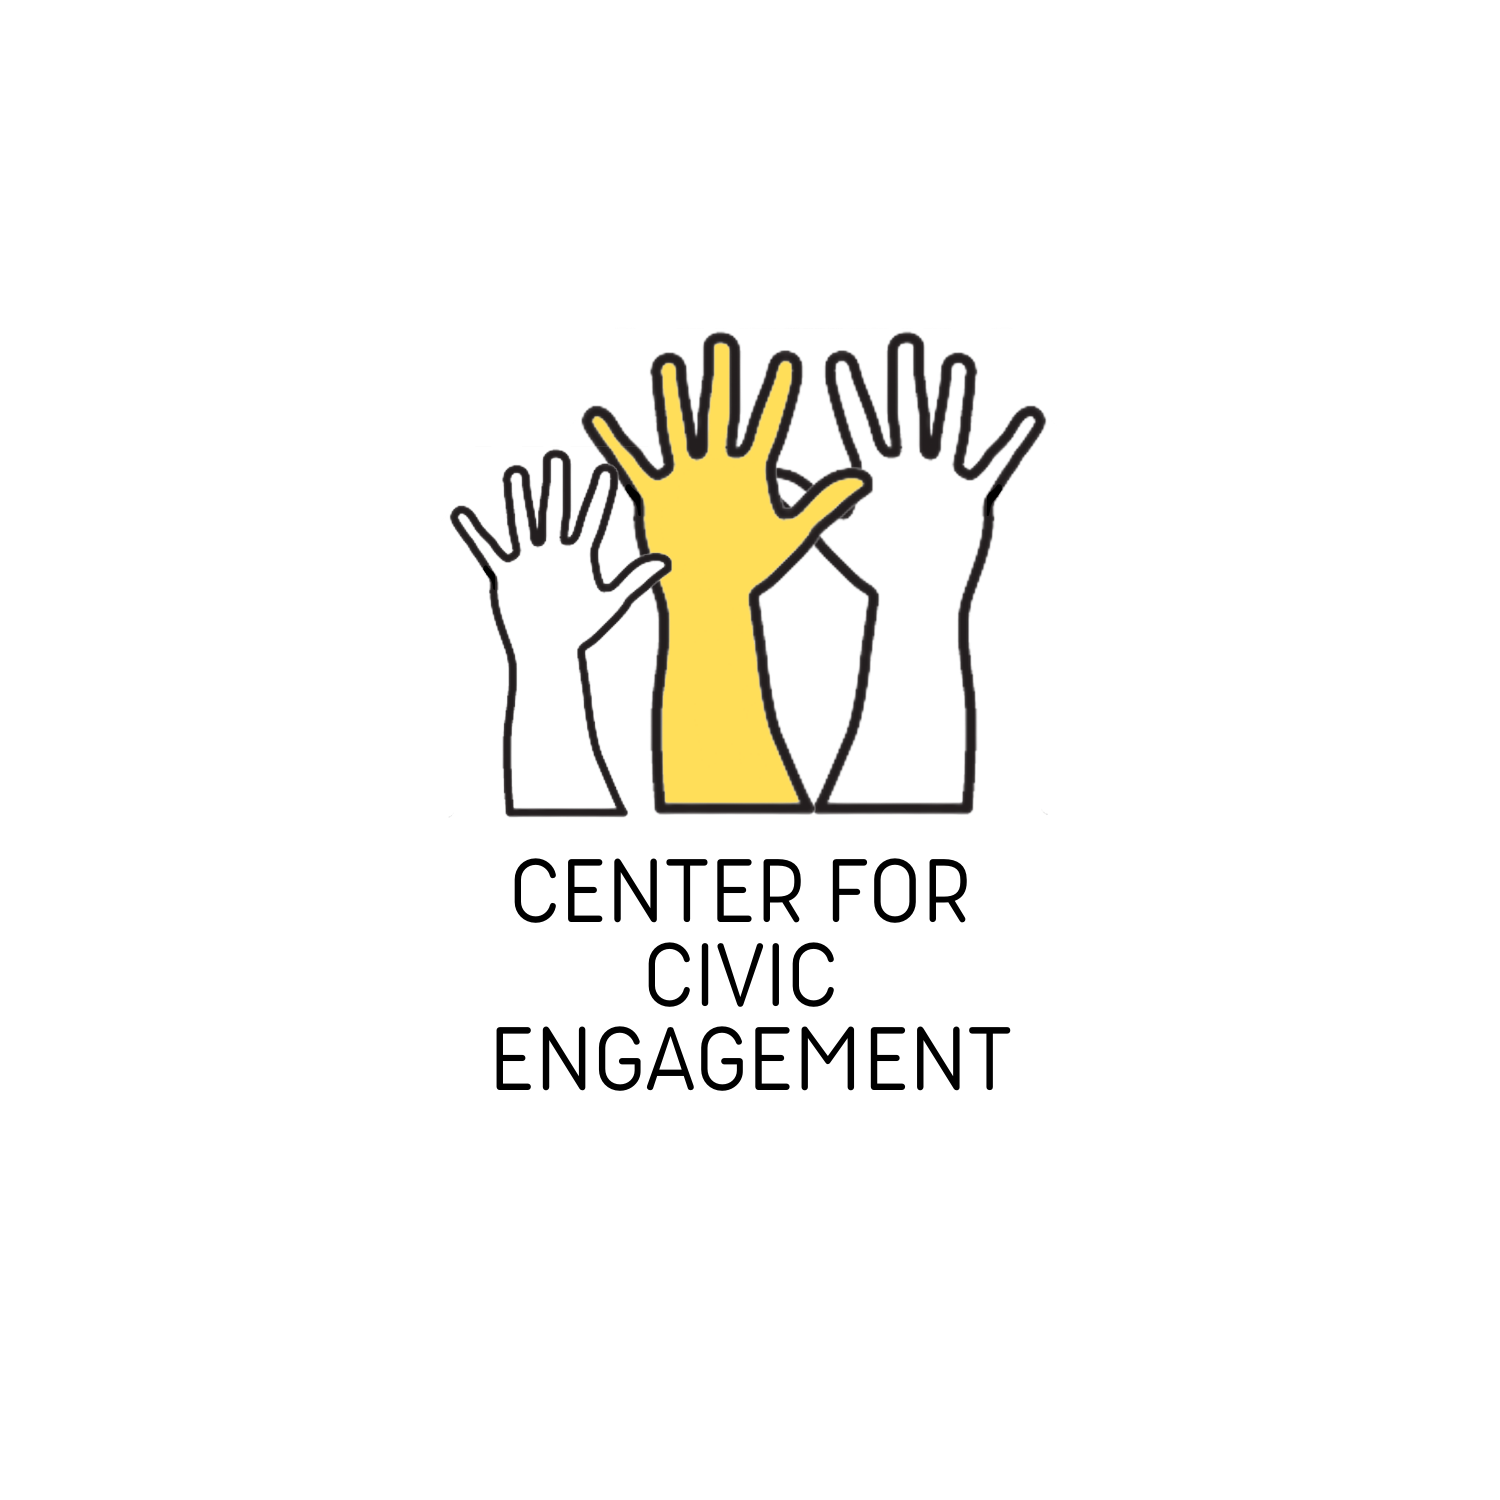 Center for Civic Engagement at the American University of Central Asia